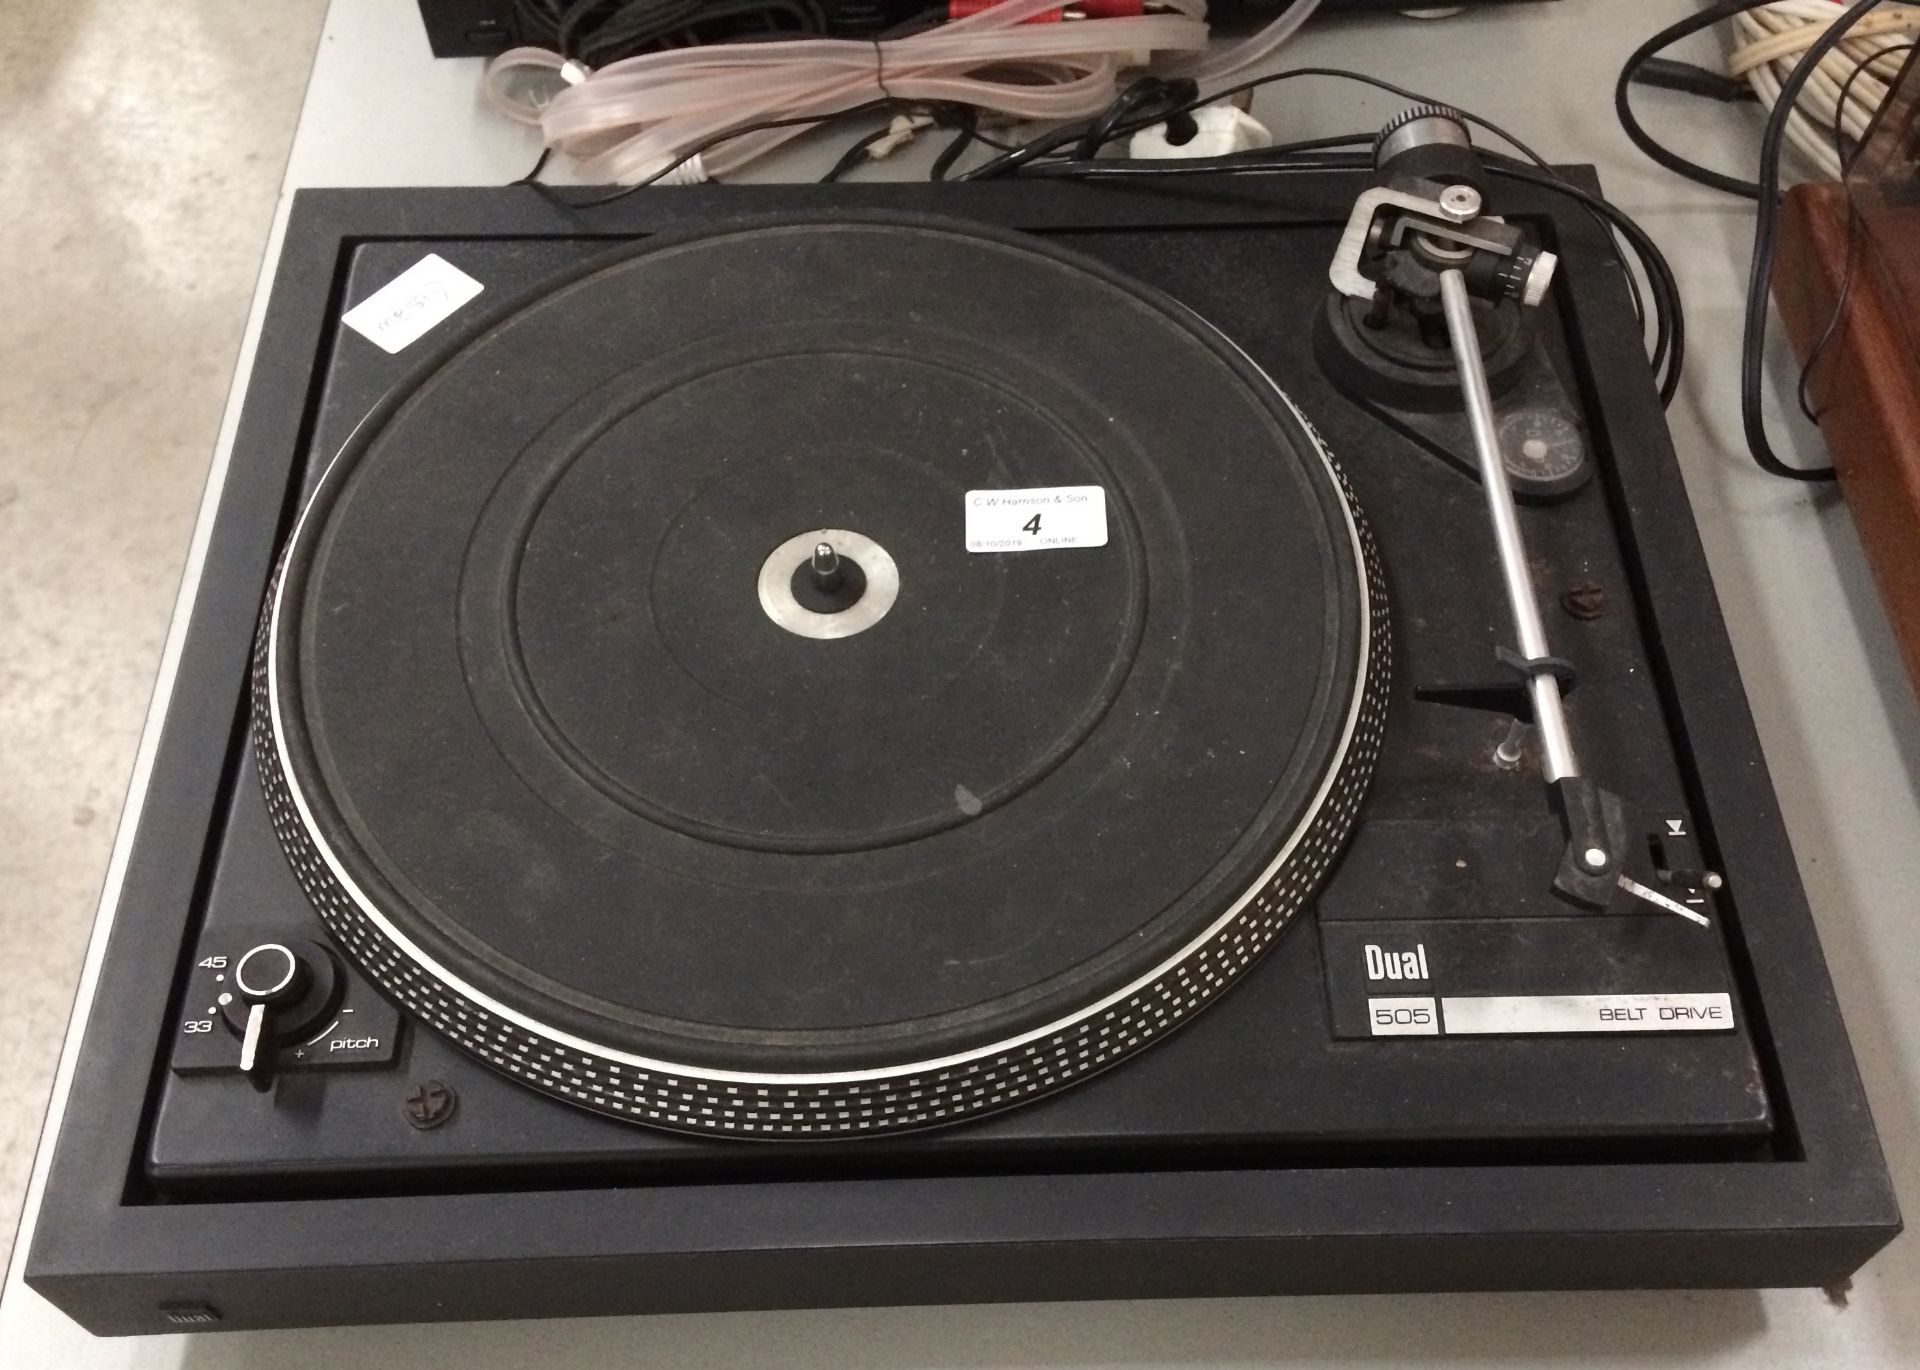 A Dual 505 turntable (non-runner)